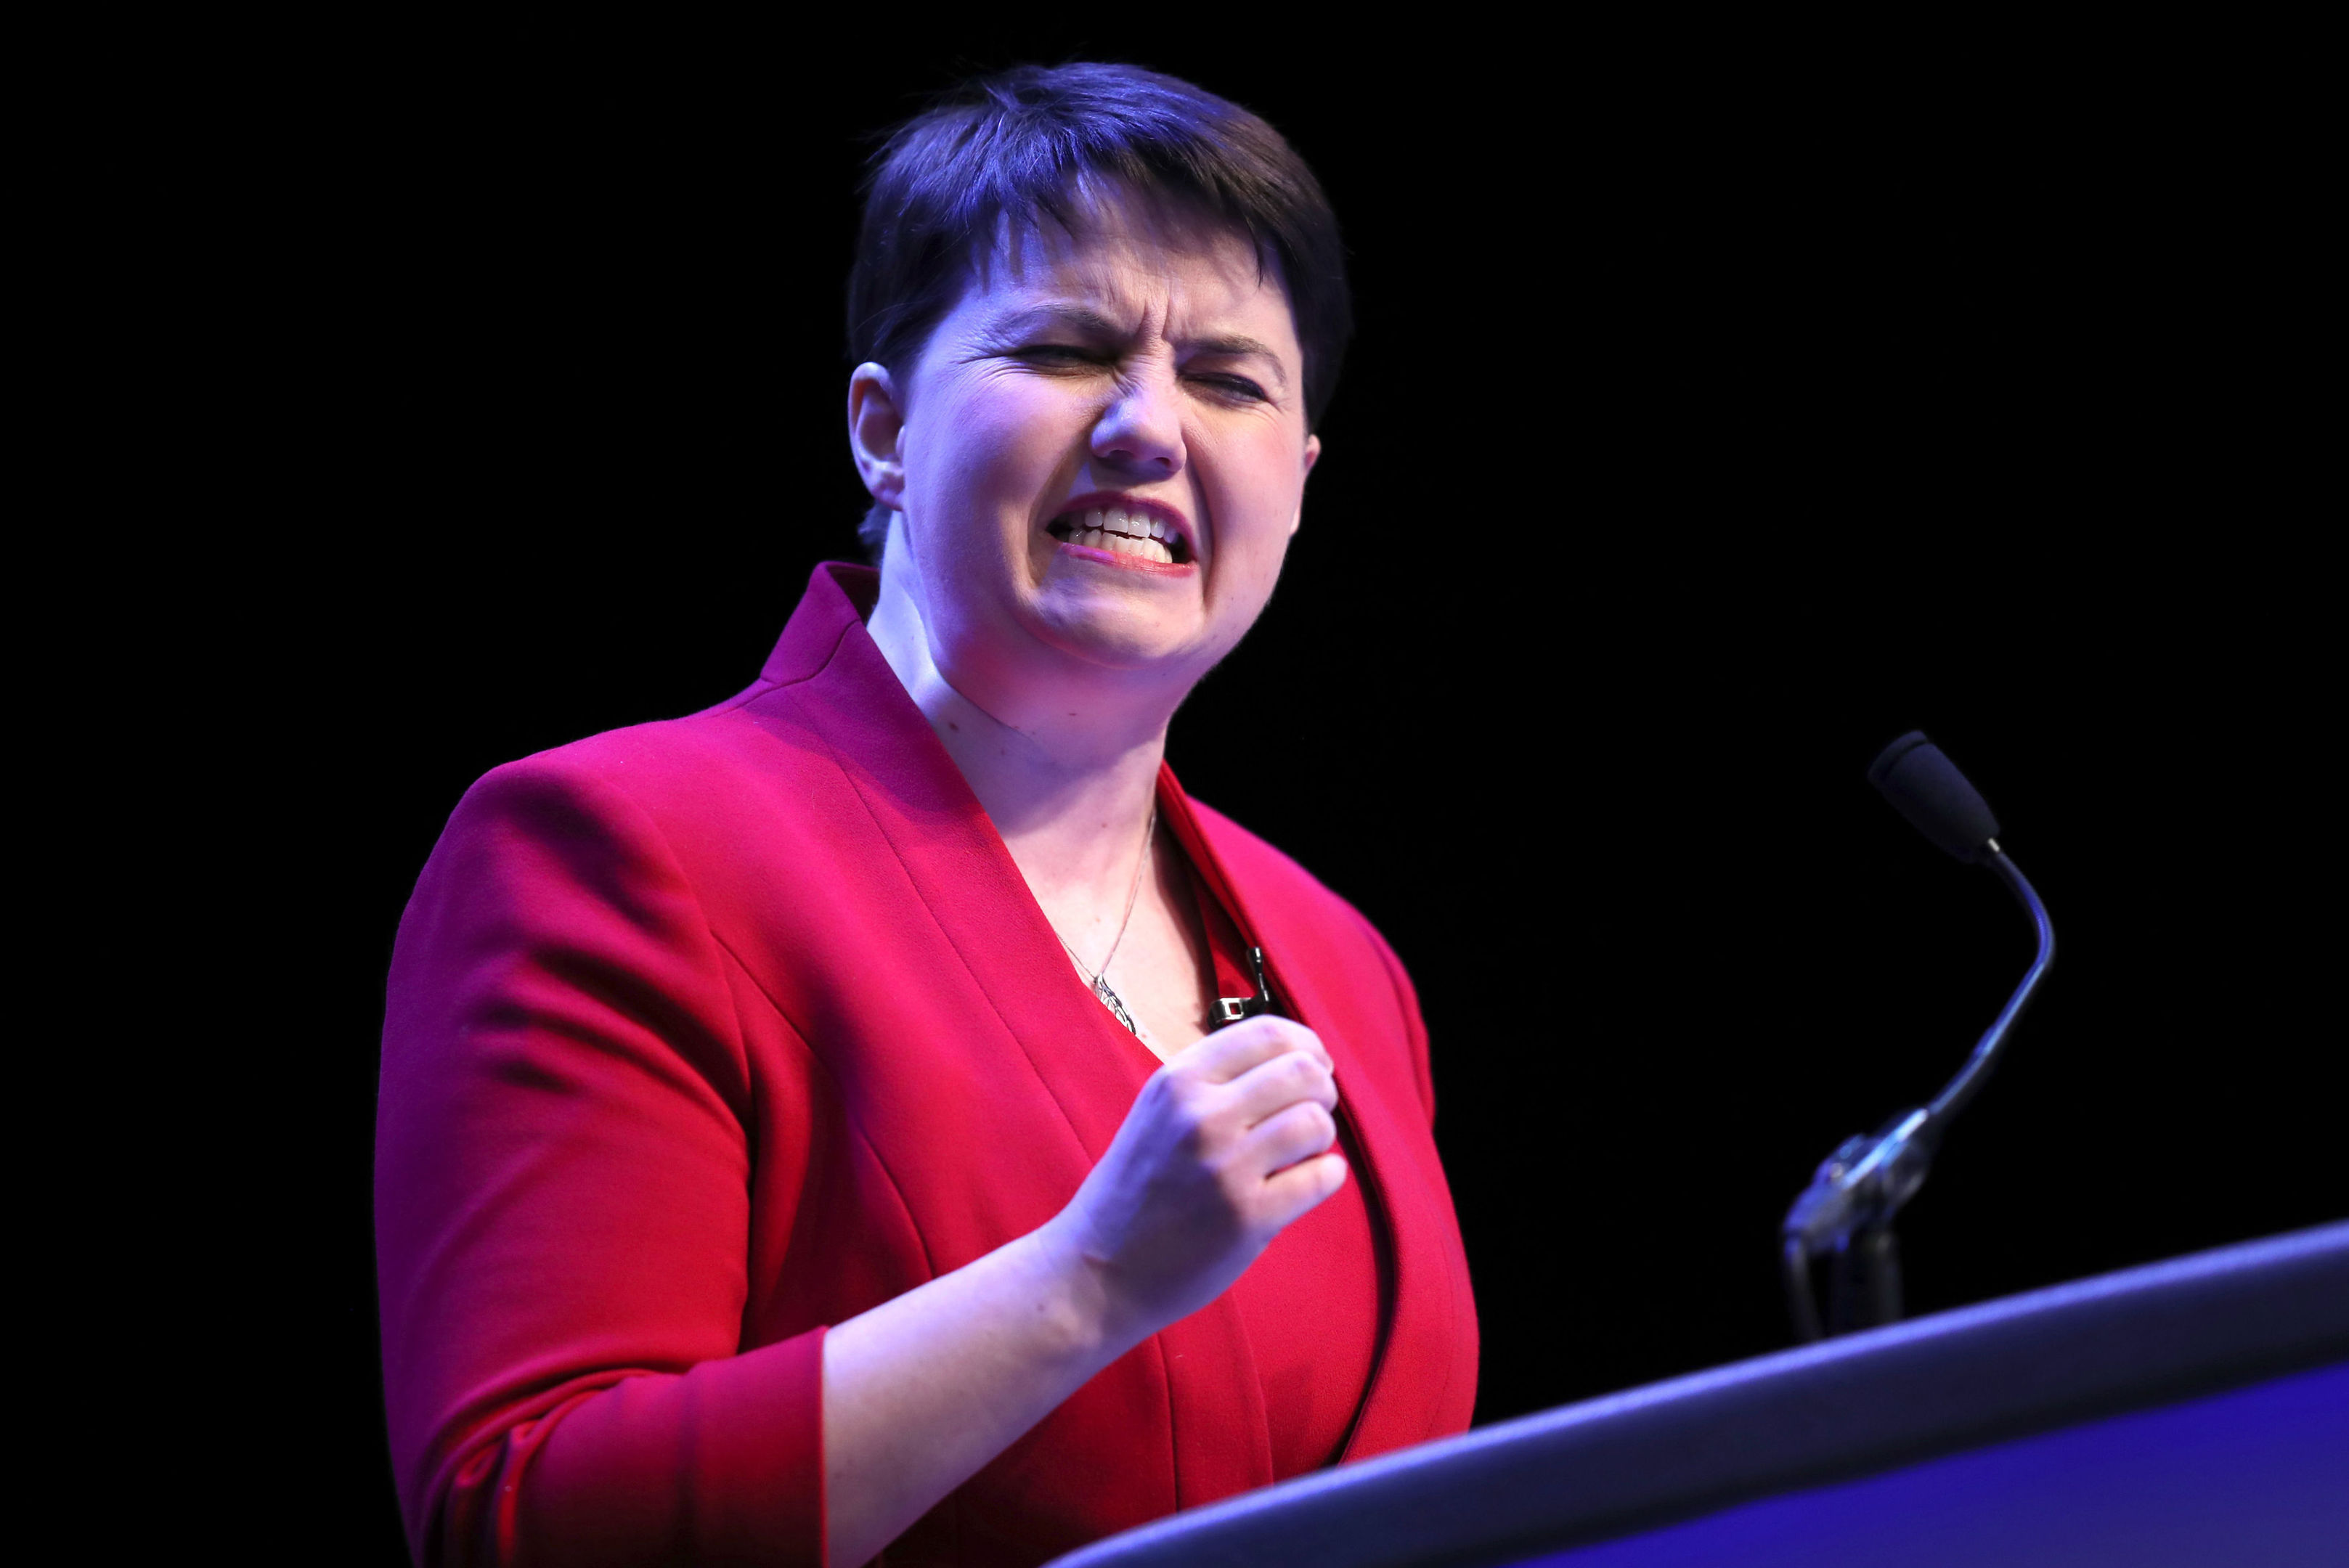 Scottish Conservative leader Ruth Davidson delivers her keynote speech at the annual Scottish Conservative conference at the Scottish Exhibition and Conference Centre in Glasgow. (Jane Barlow/PA Wire)